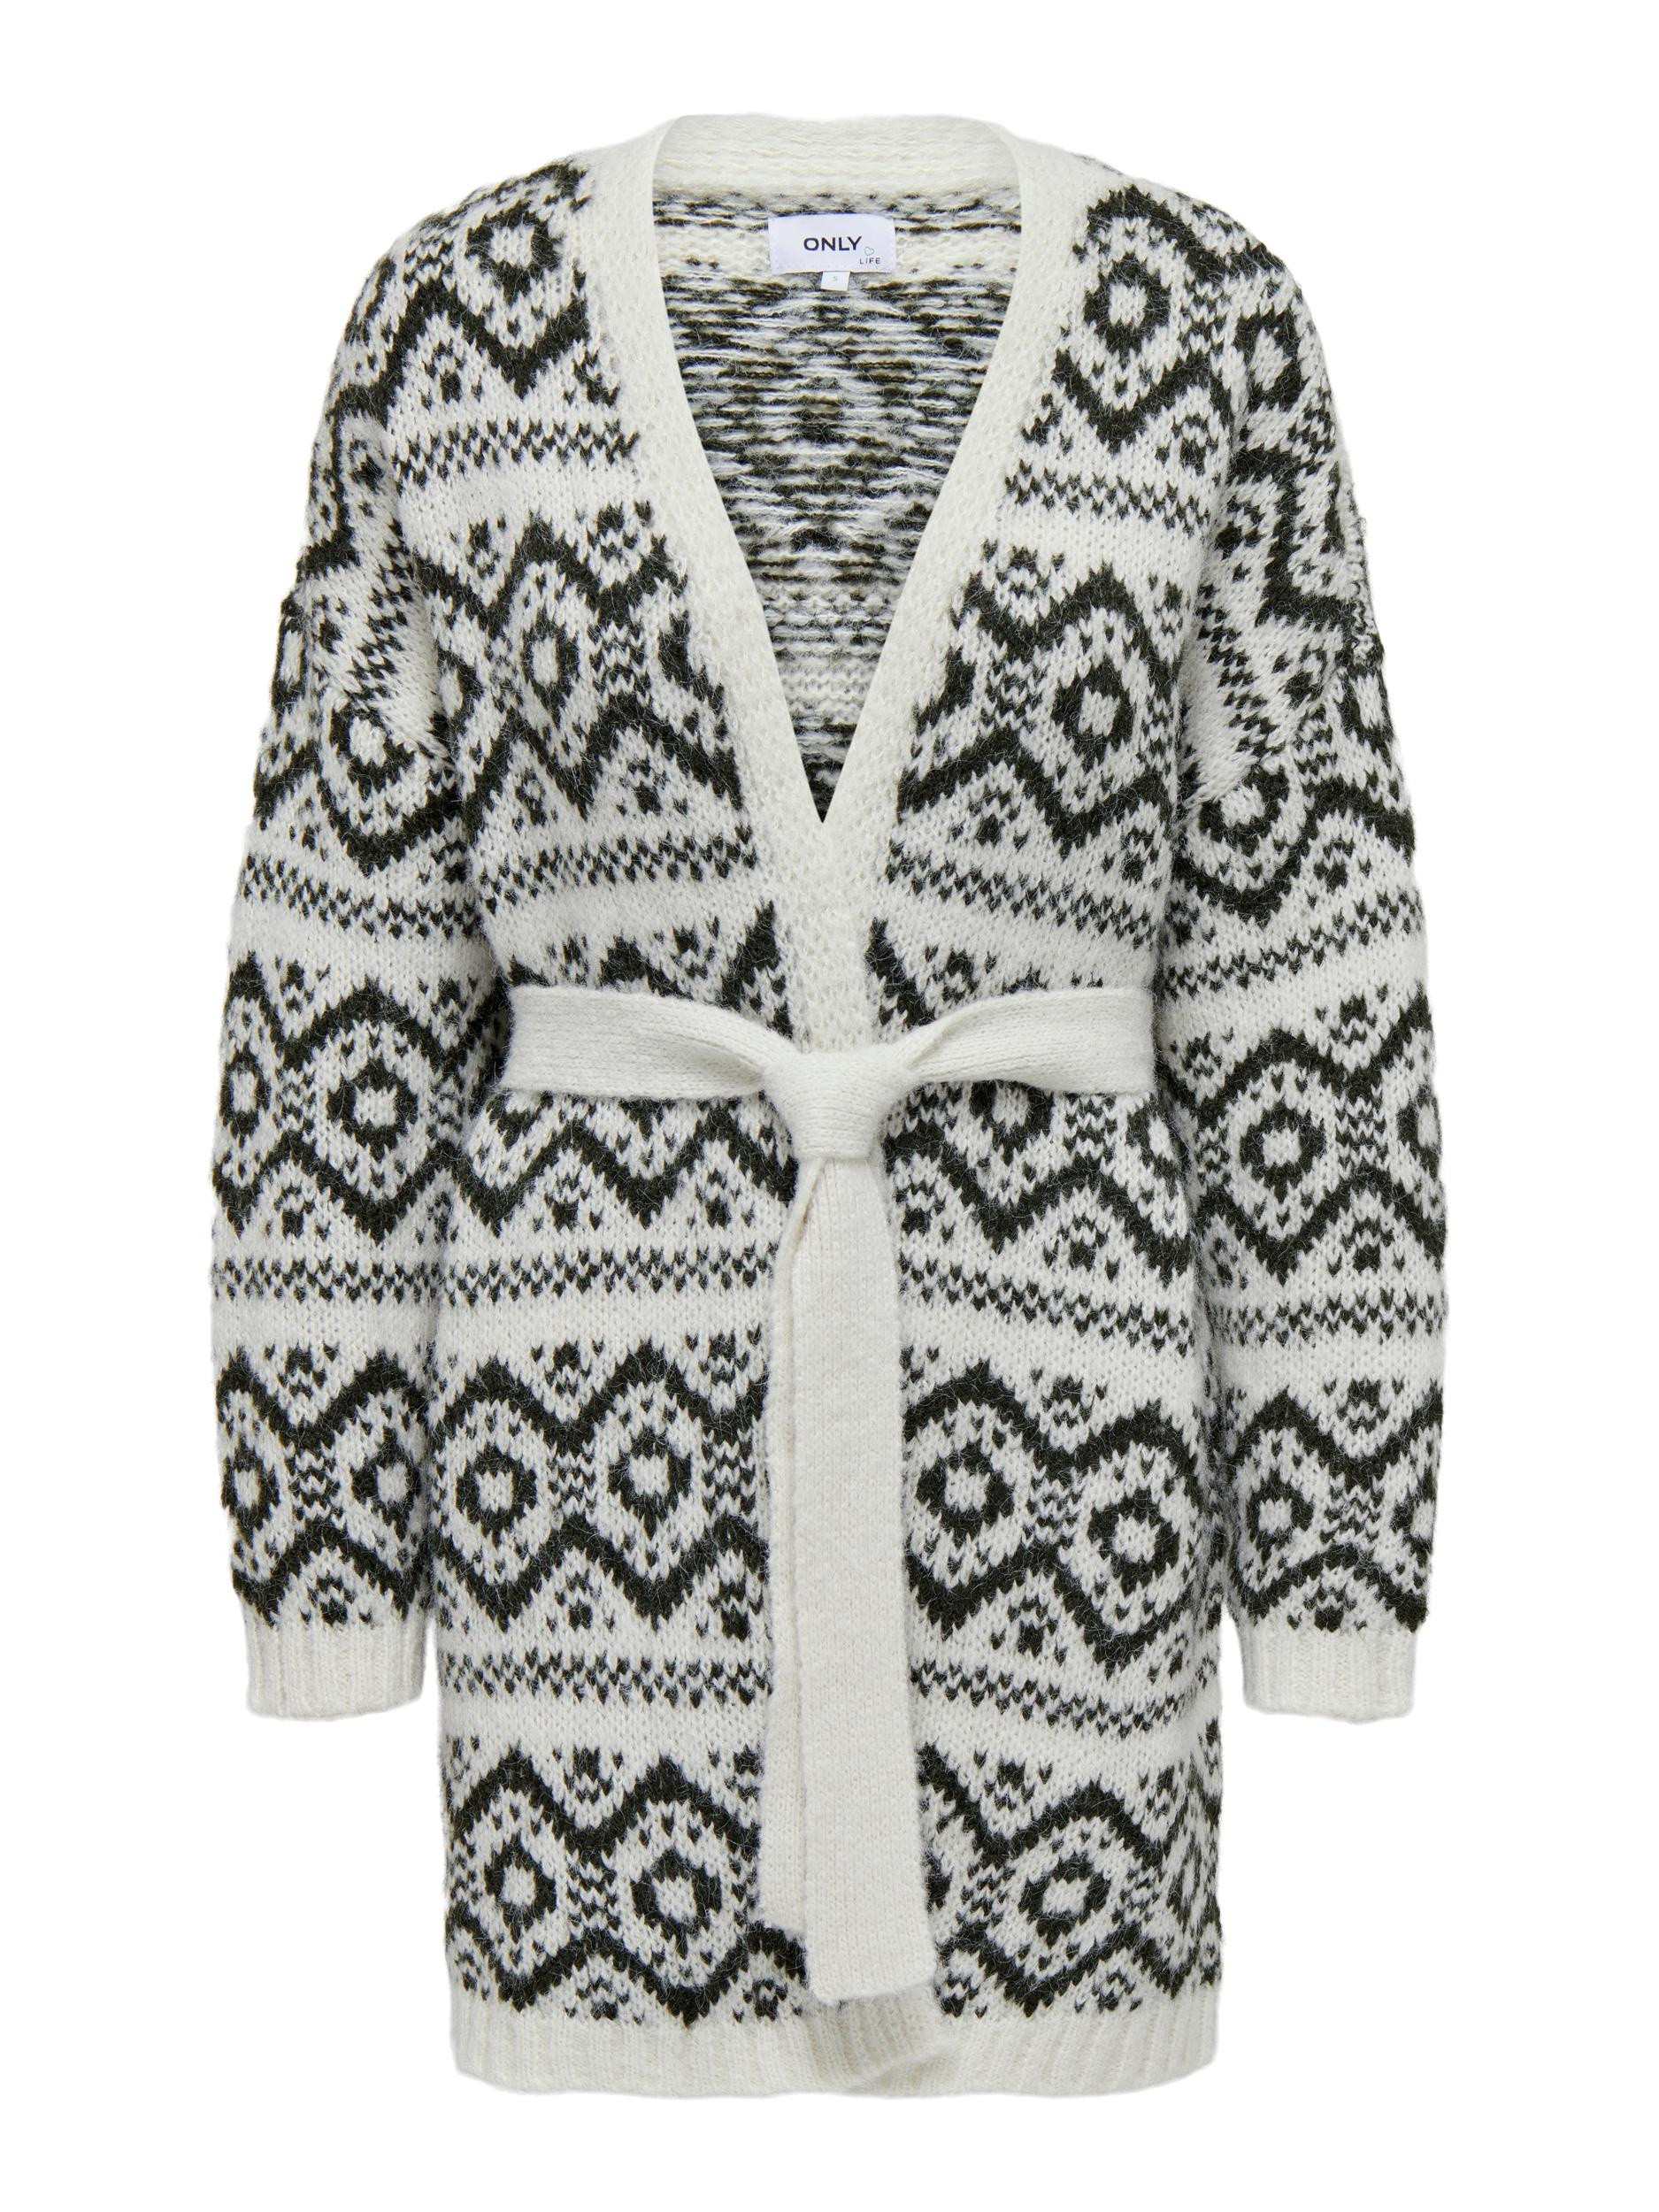 Only - Cardigan lungo con stampa, Grigio, large image number 0